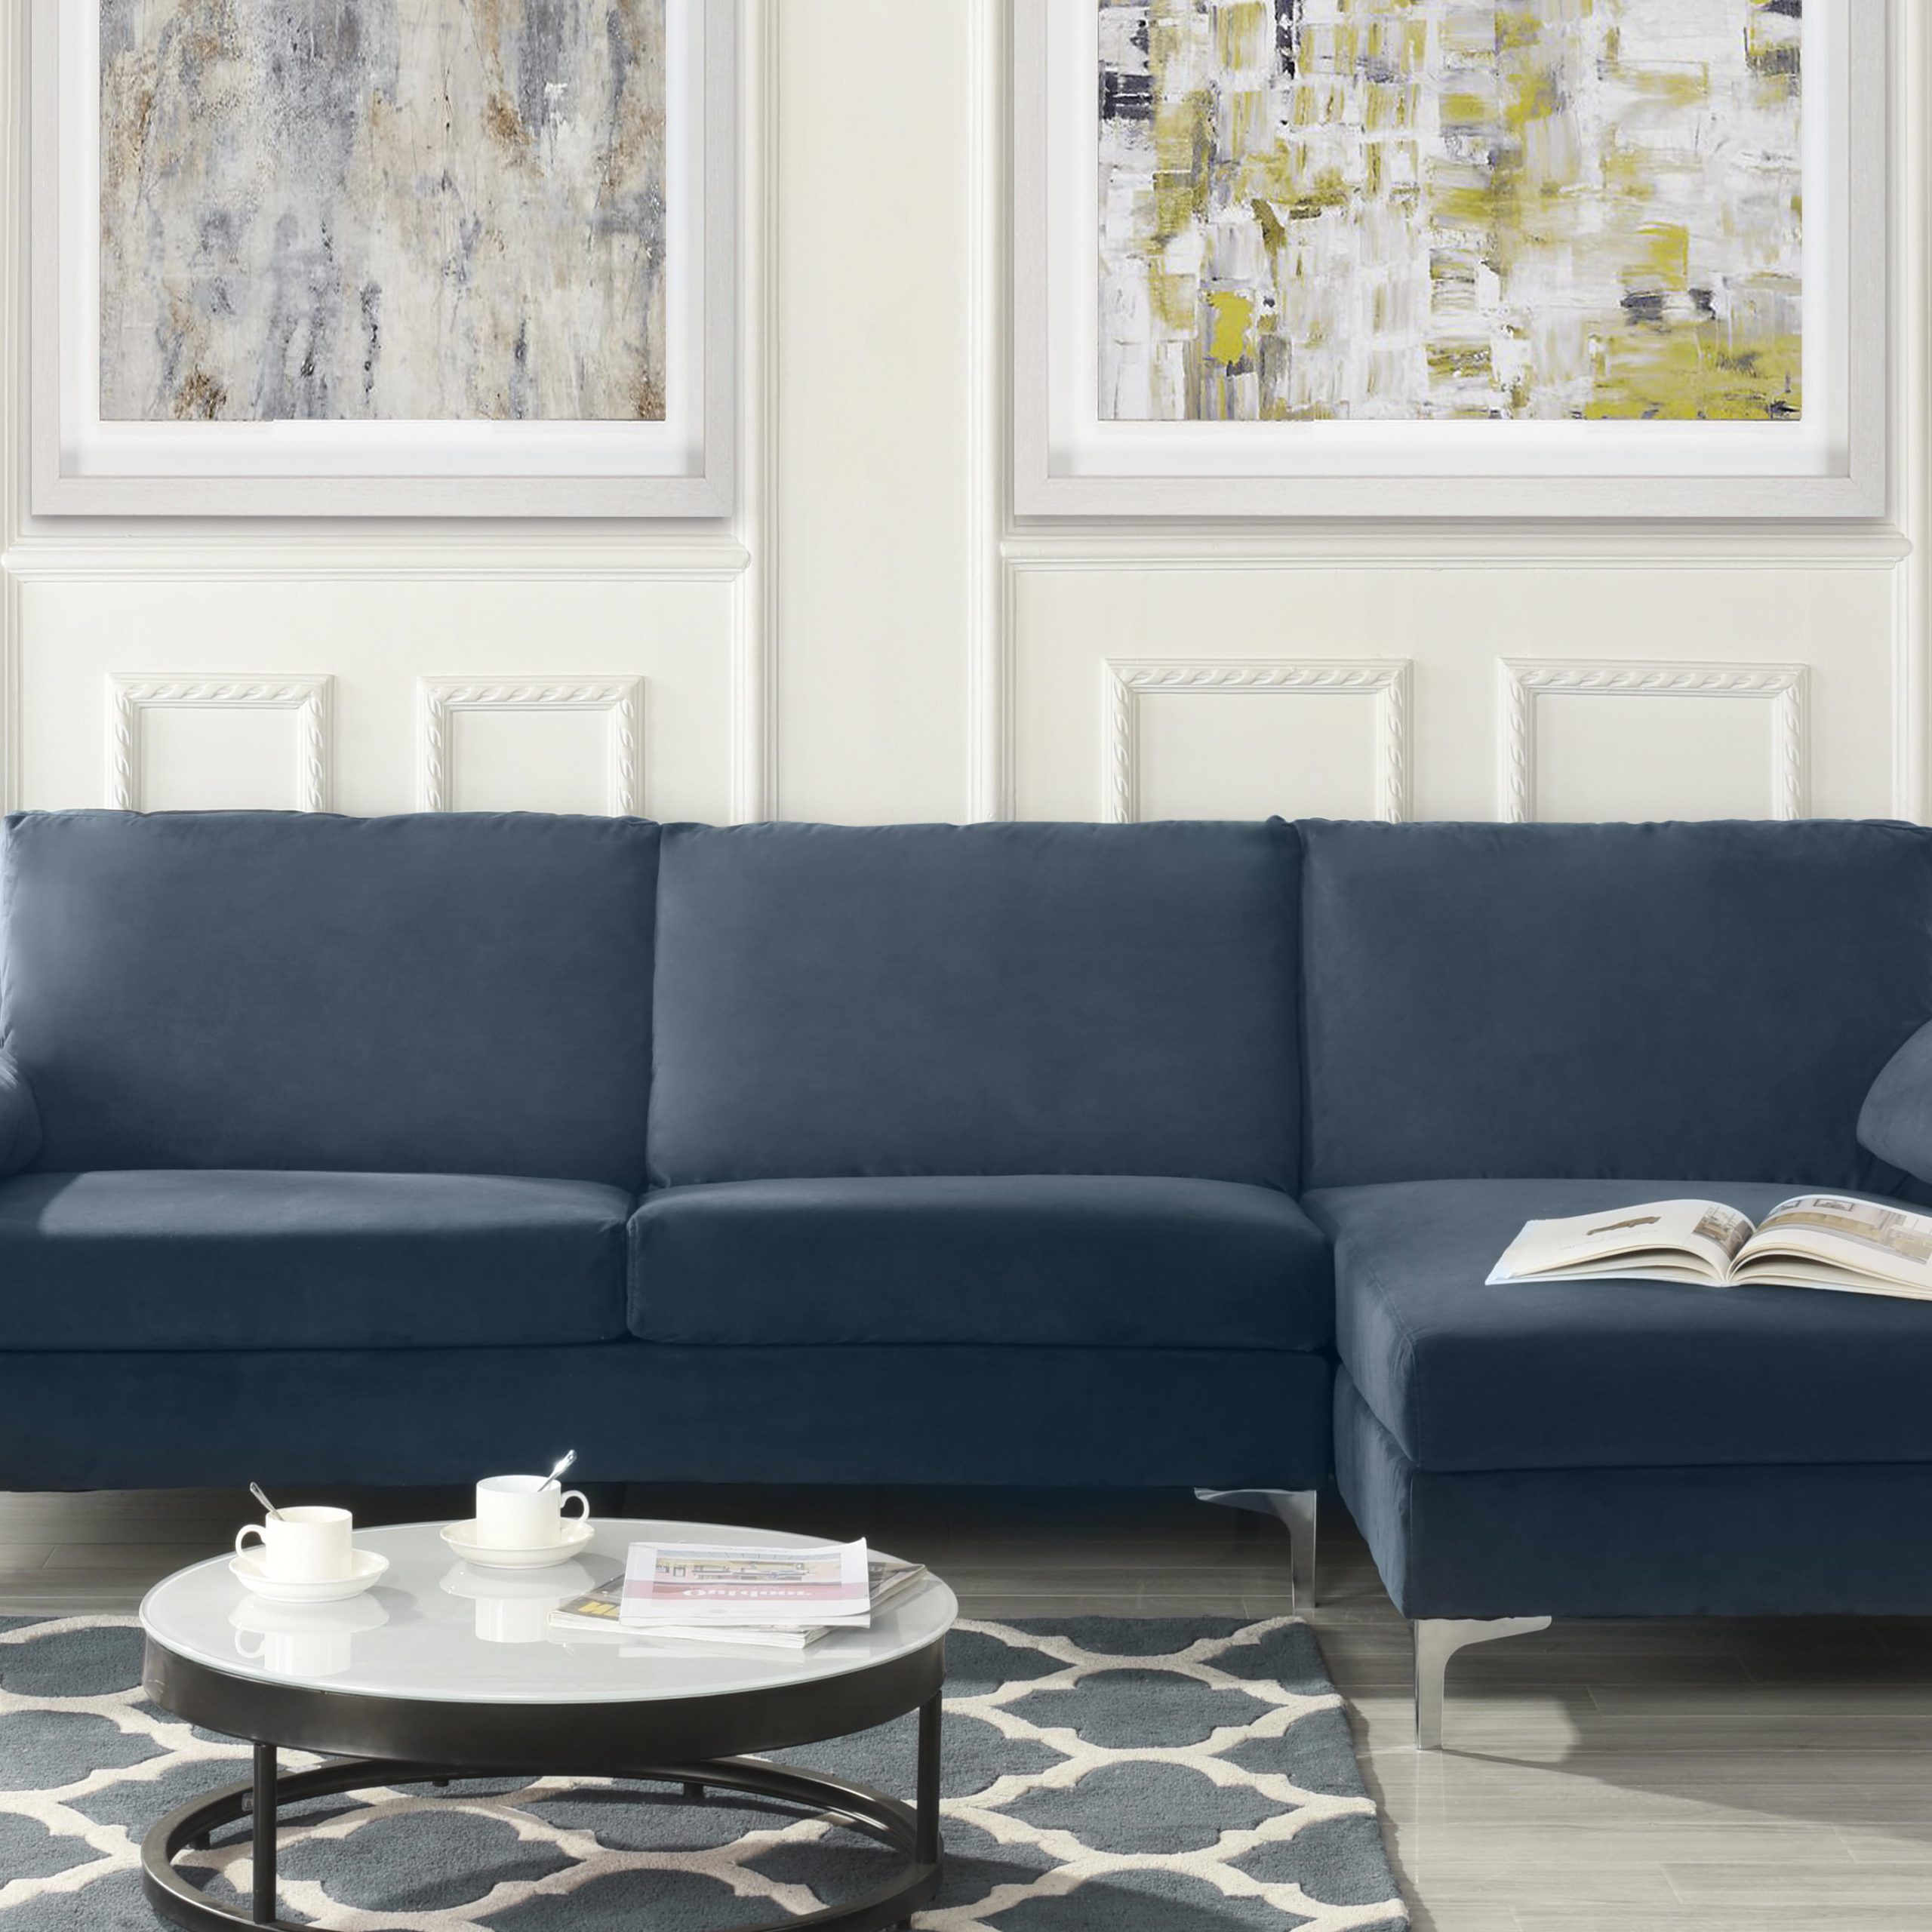 Modern Velvet Fabric Sectional Sofa, Large L Shape Couch With Wide Within Modern Velvet Sofa Recliners With Storage (Gallery 6 of 20)